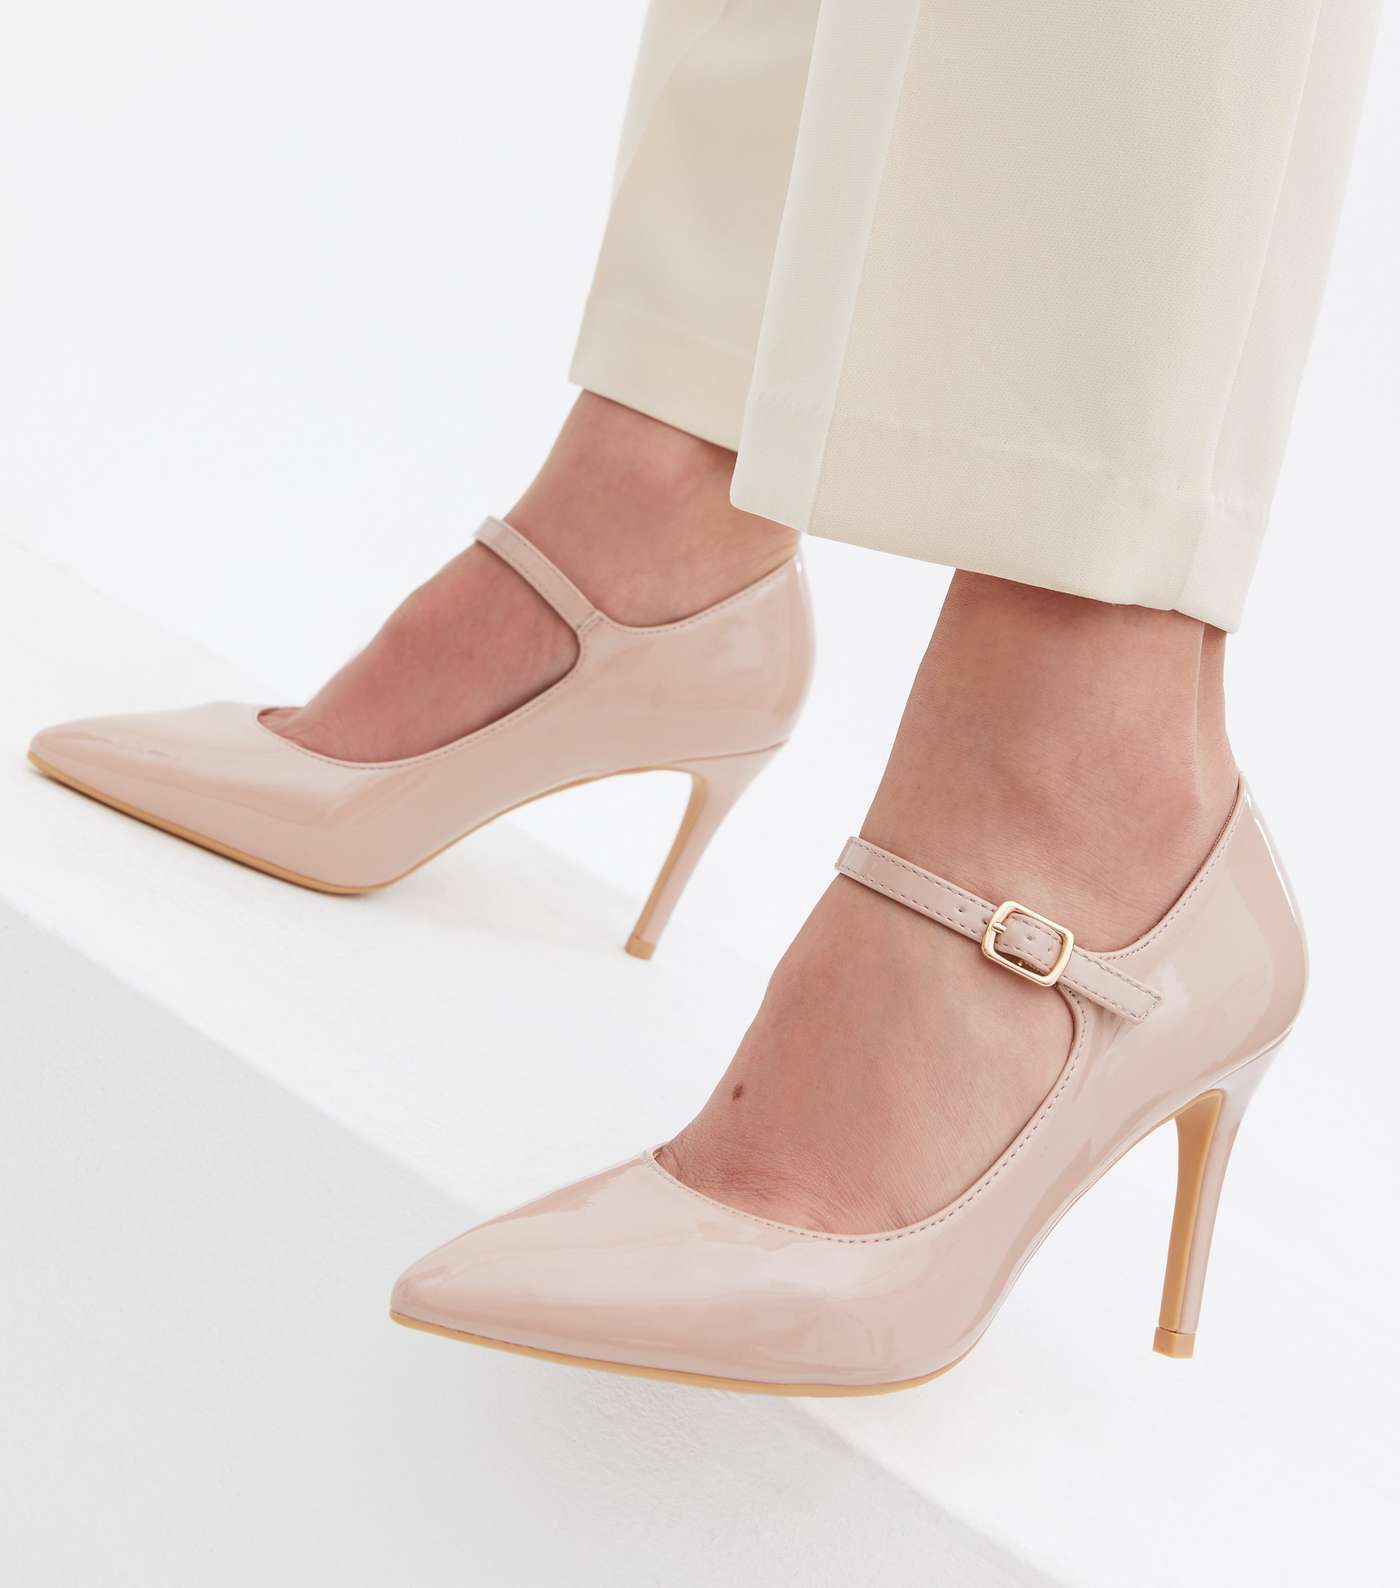 Pale Pink Patent Buckle Stiletto Heel Court Shoes Image 2